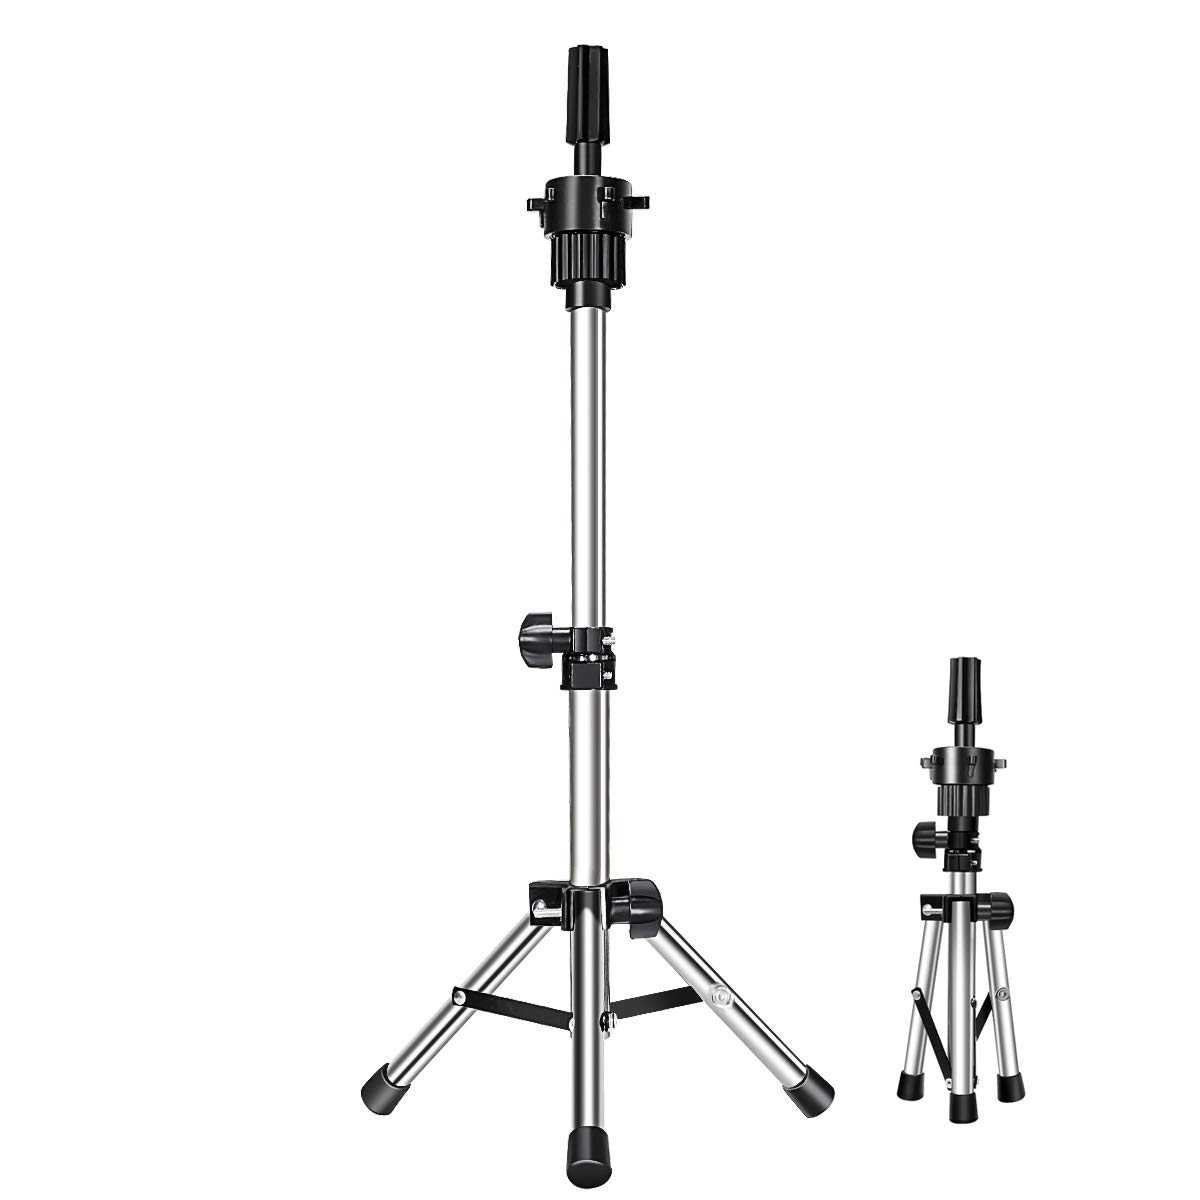 Wig Head Stand - Adjustable Mannequin Head Stand - Wig Stand Tripod - Wig  Styling Stand for Cosmetology Hairdressing Training (Head Not Included)